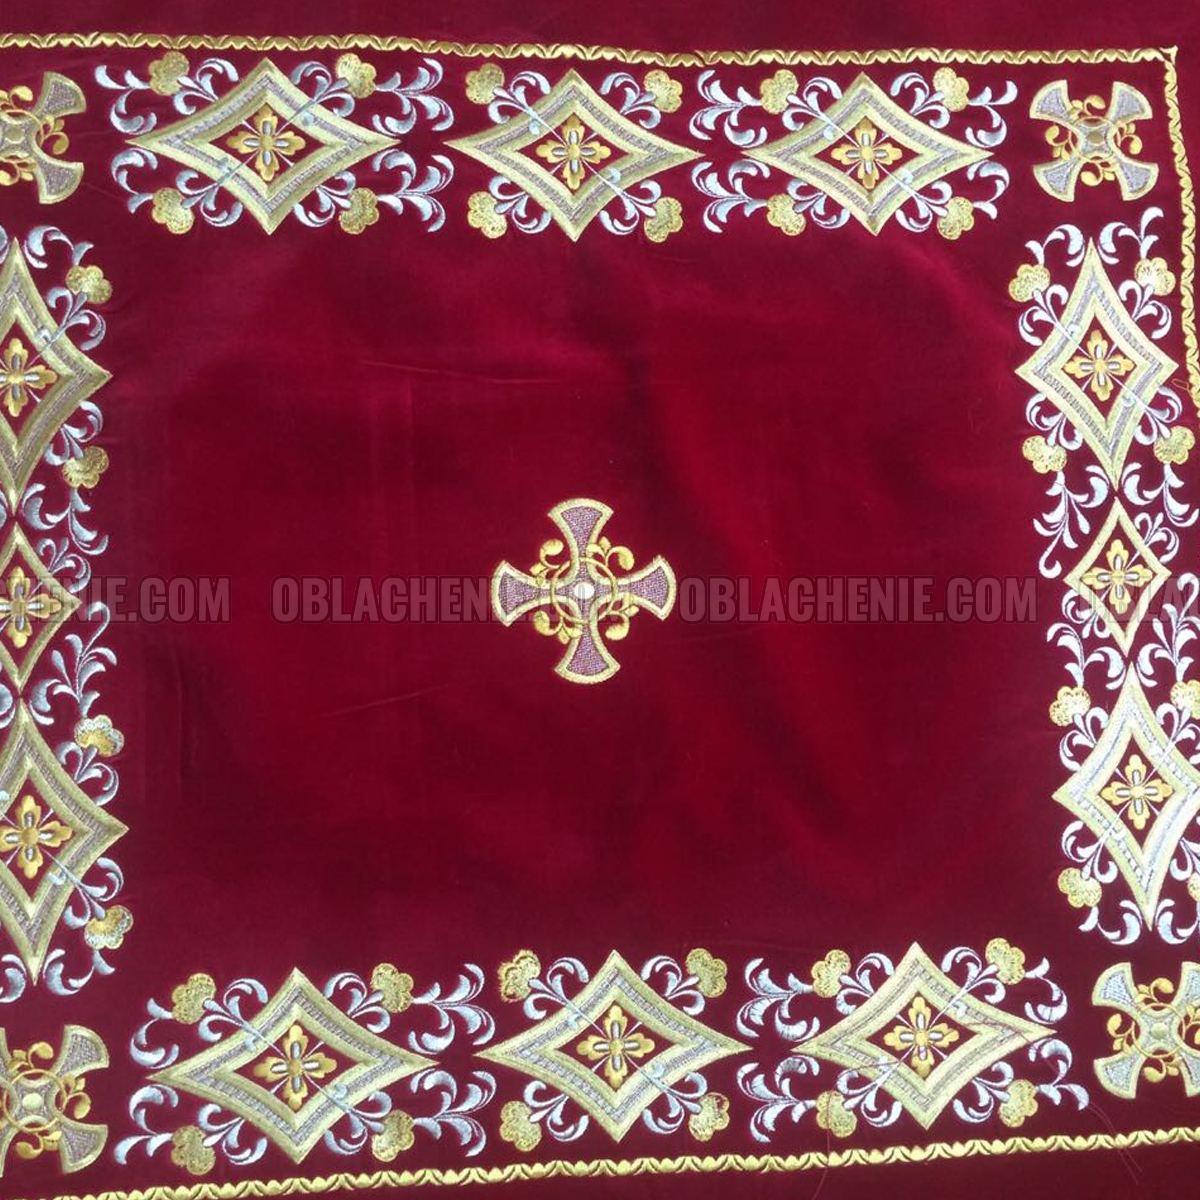 Holy Table vestments 10440